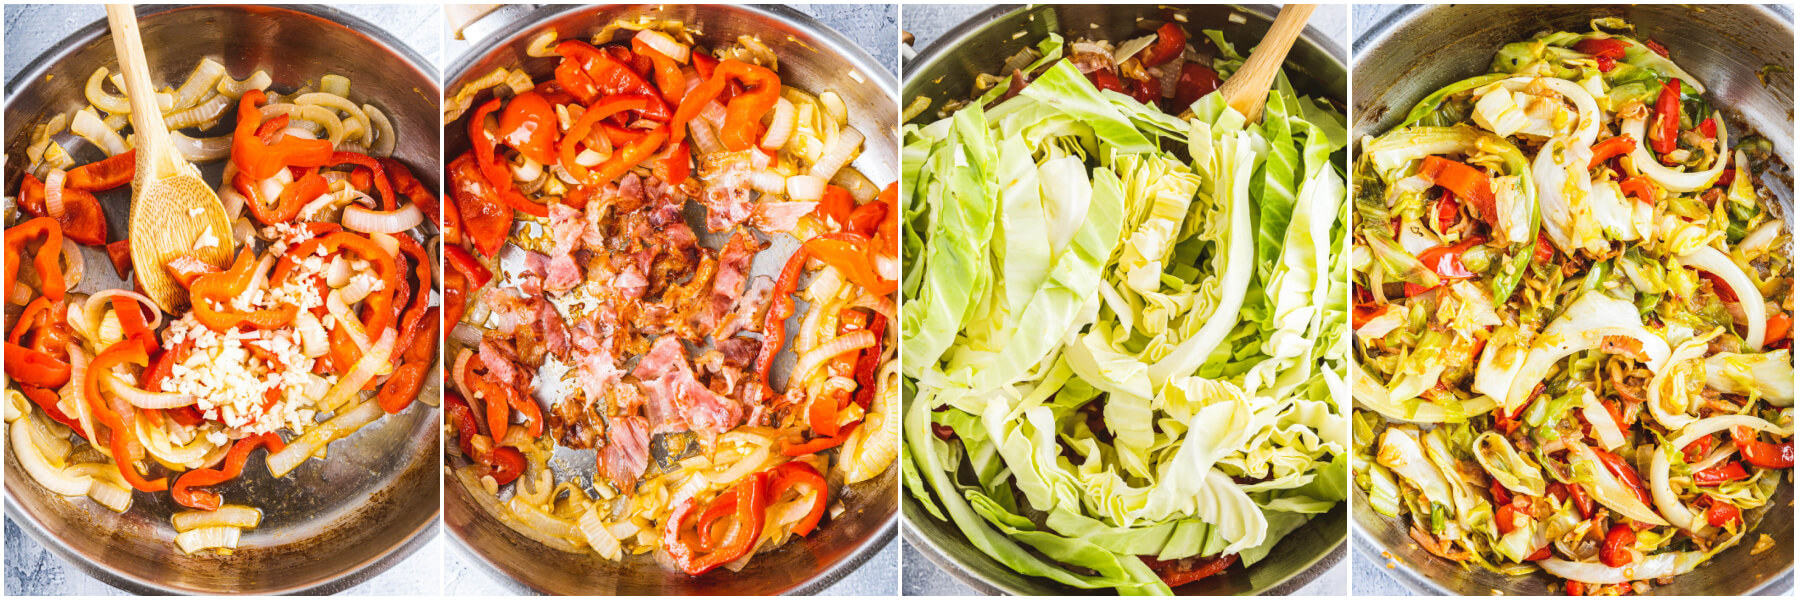 Process images showing the different stages of frying cabbage with bacon.